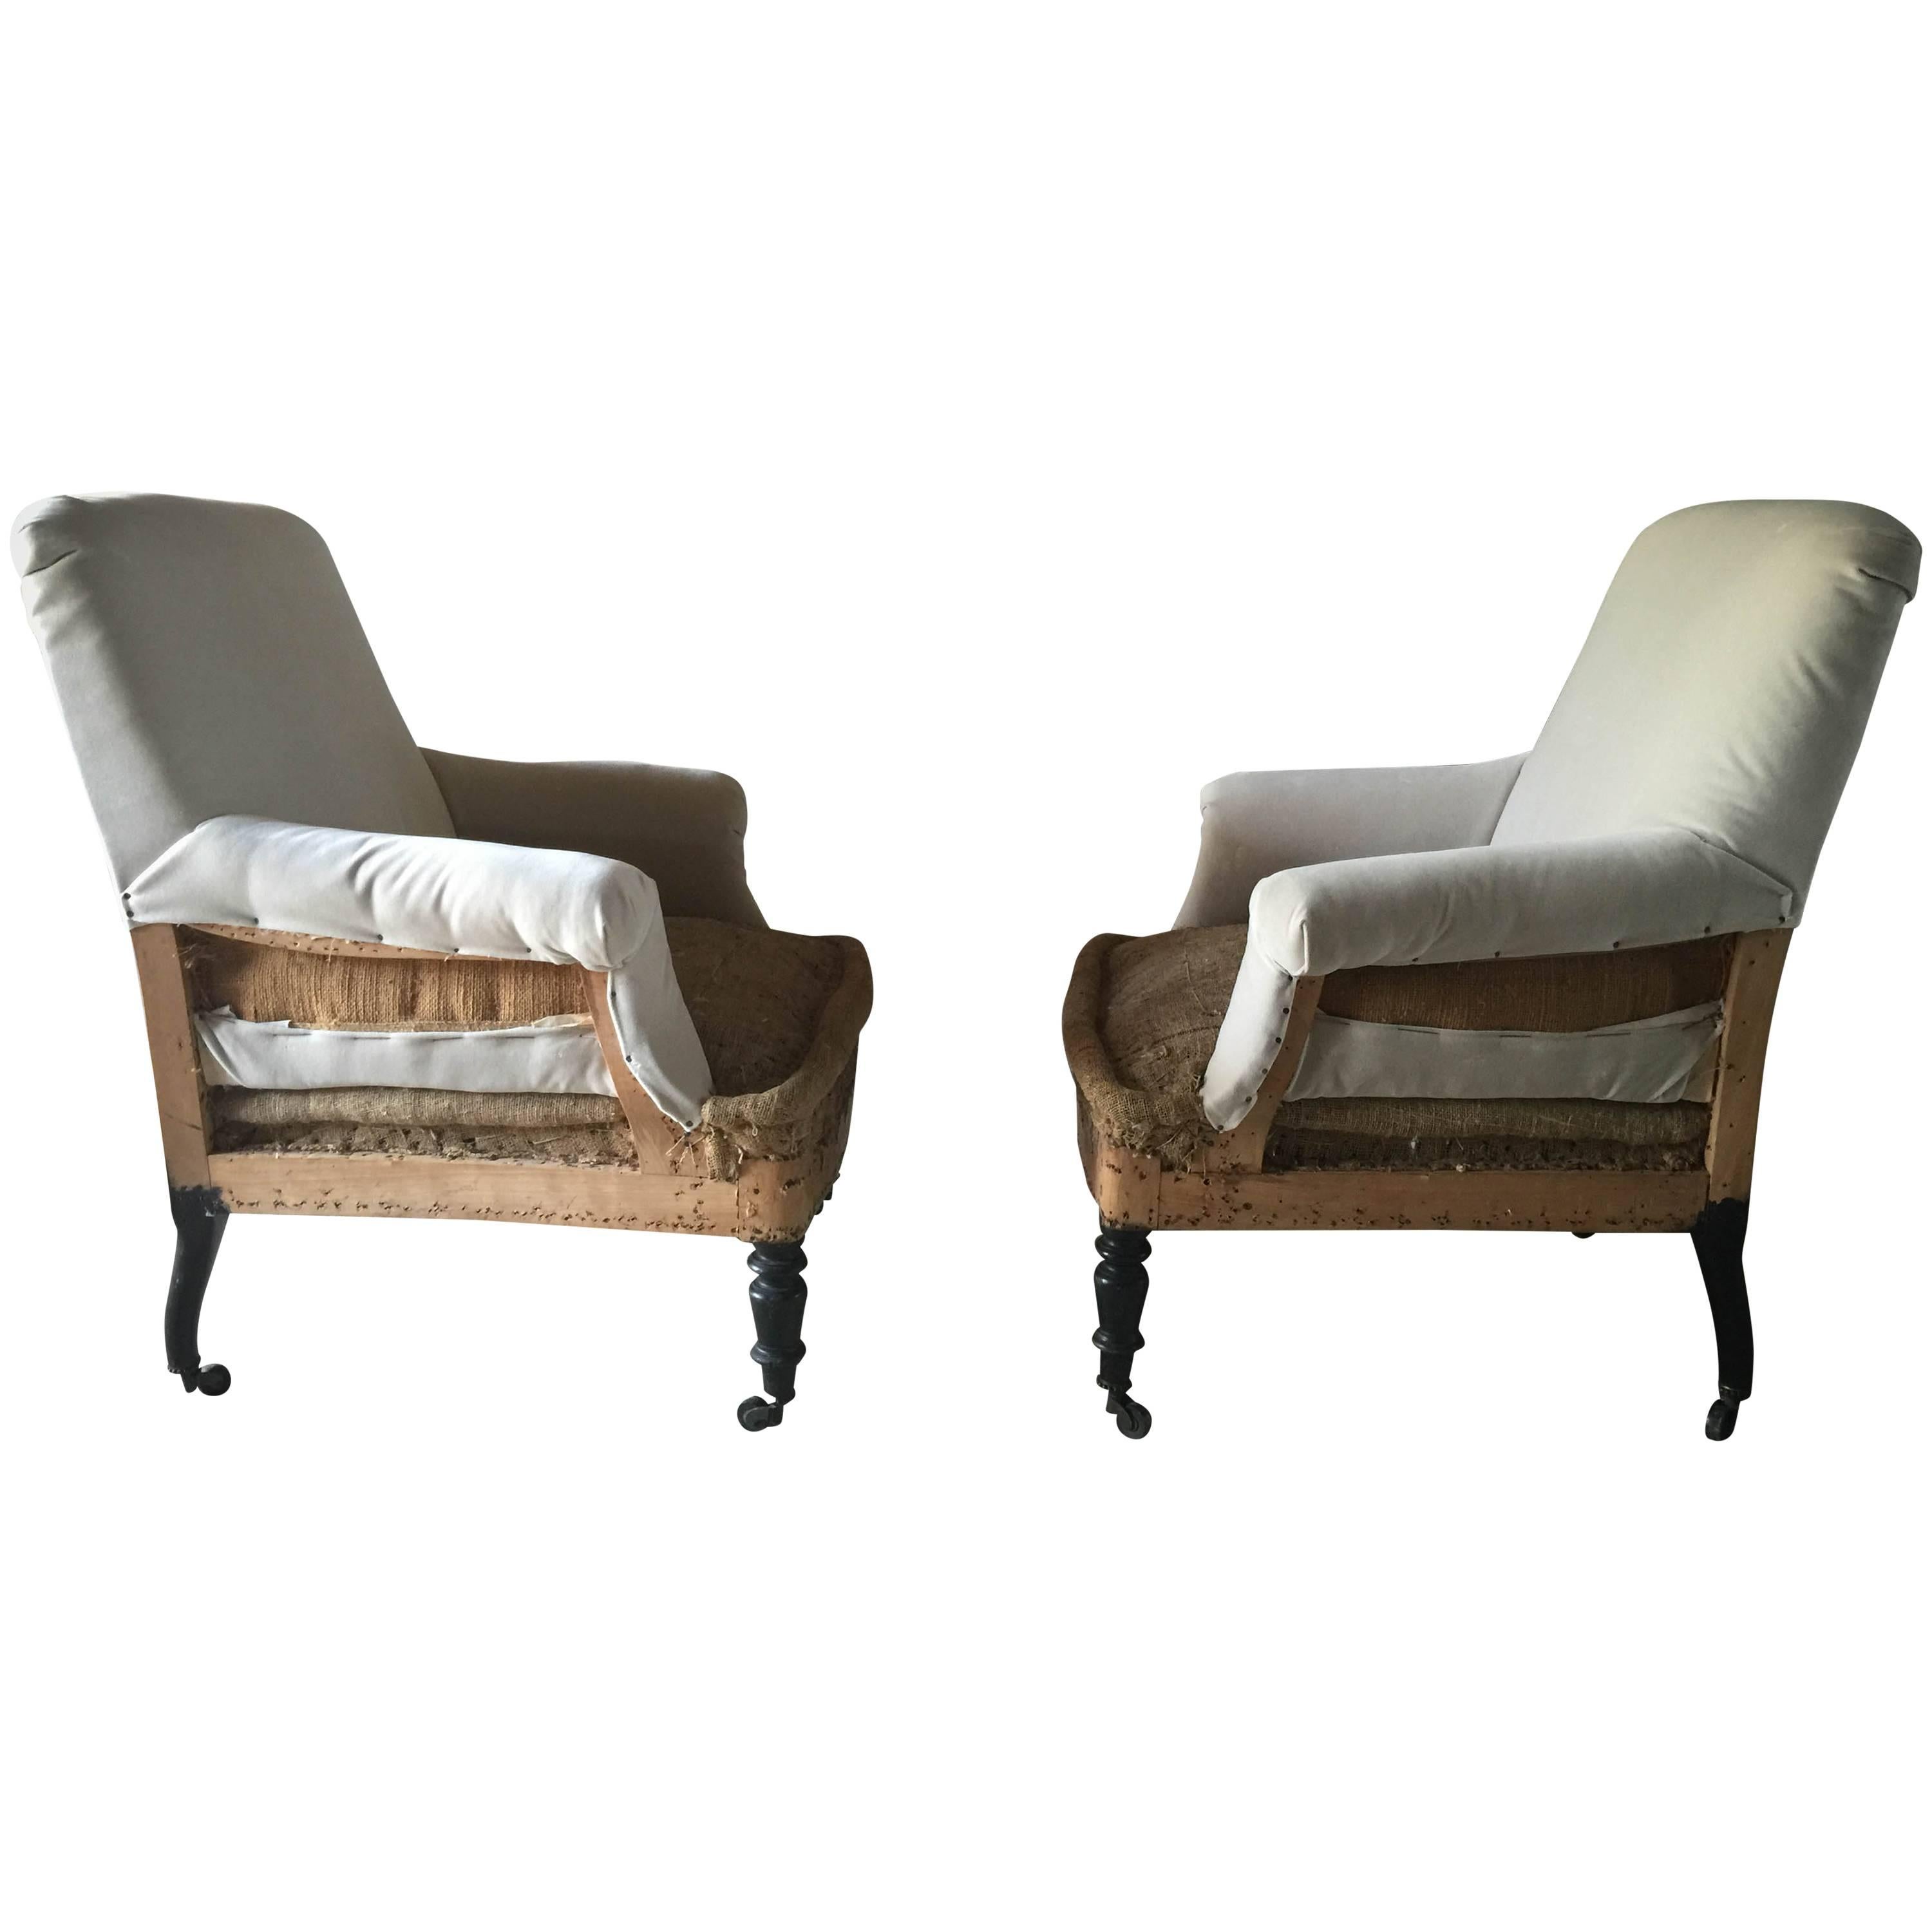 Pair of Antique French Velvet Deconstructed Club Chairs